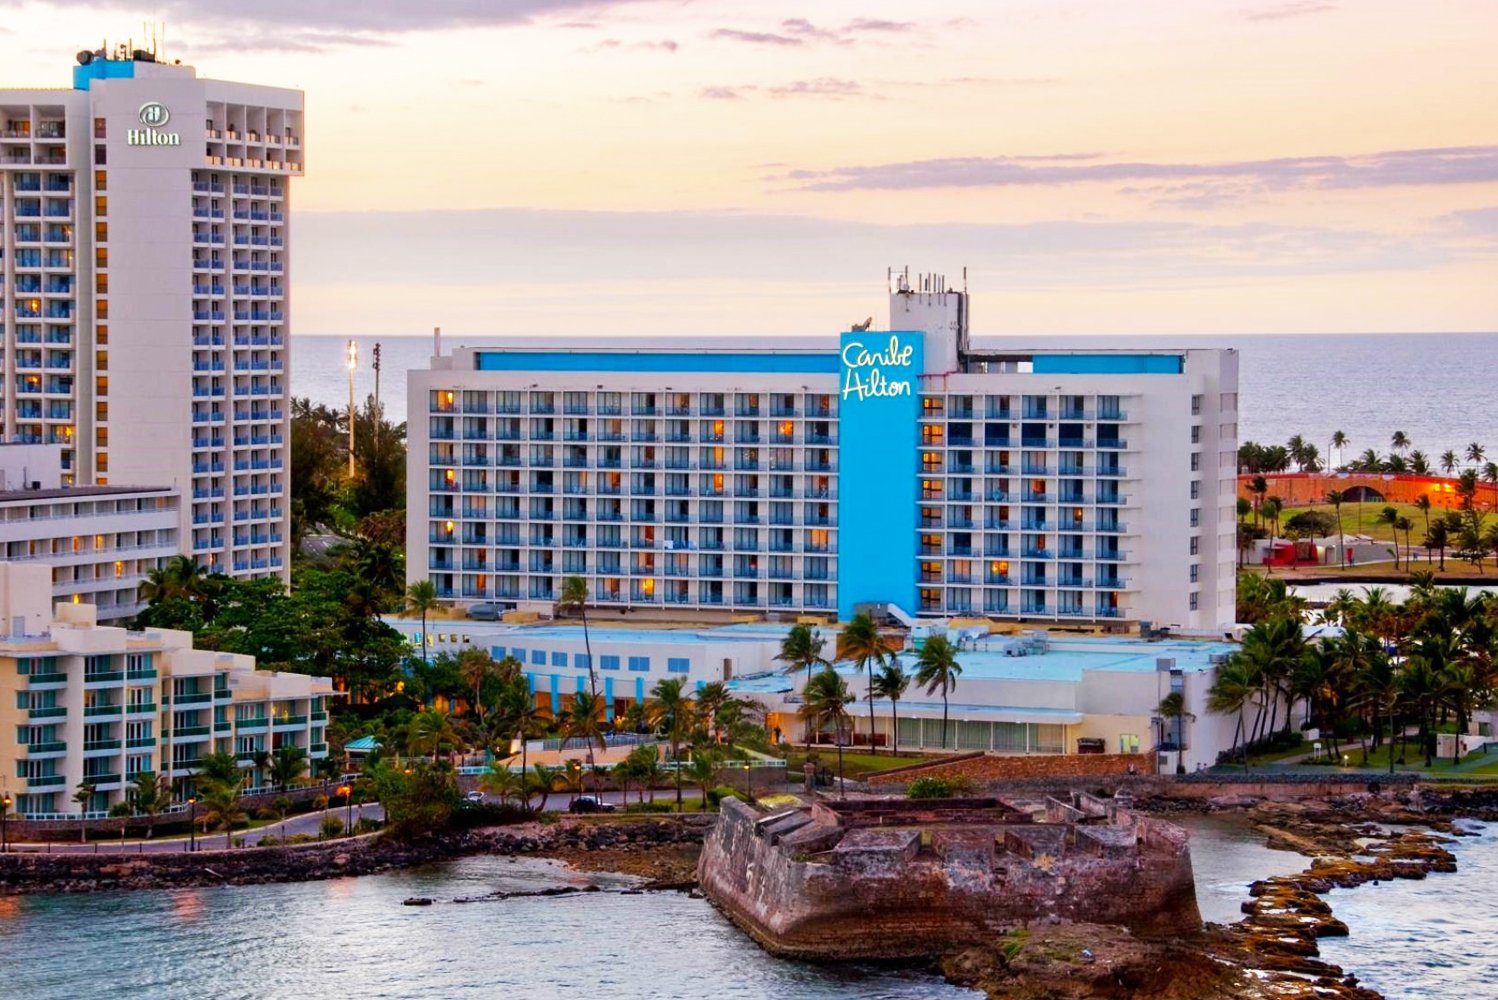 Caribe Hilton to complete 150 million restoration in May